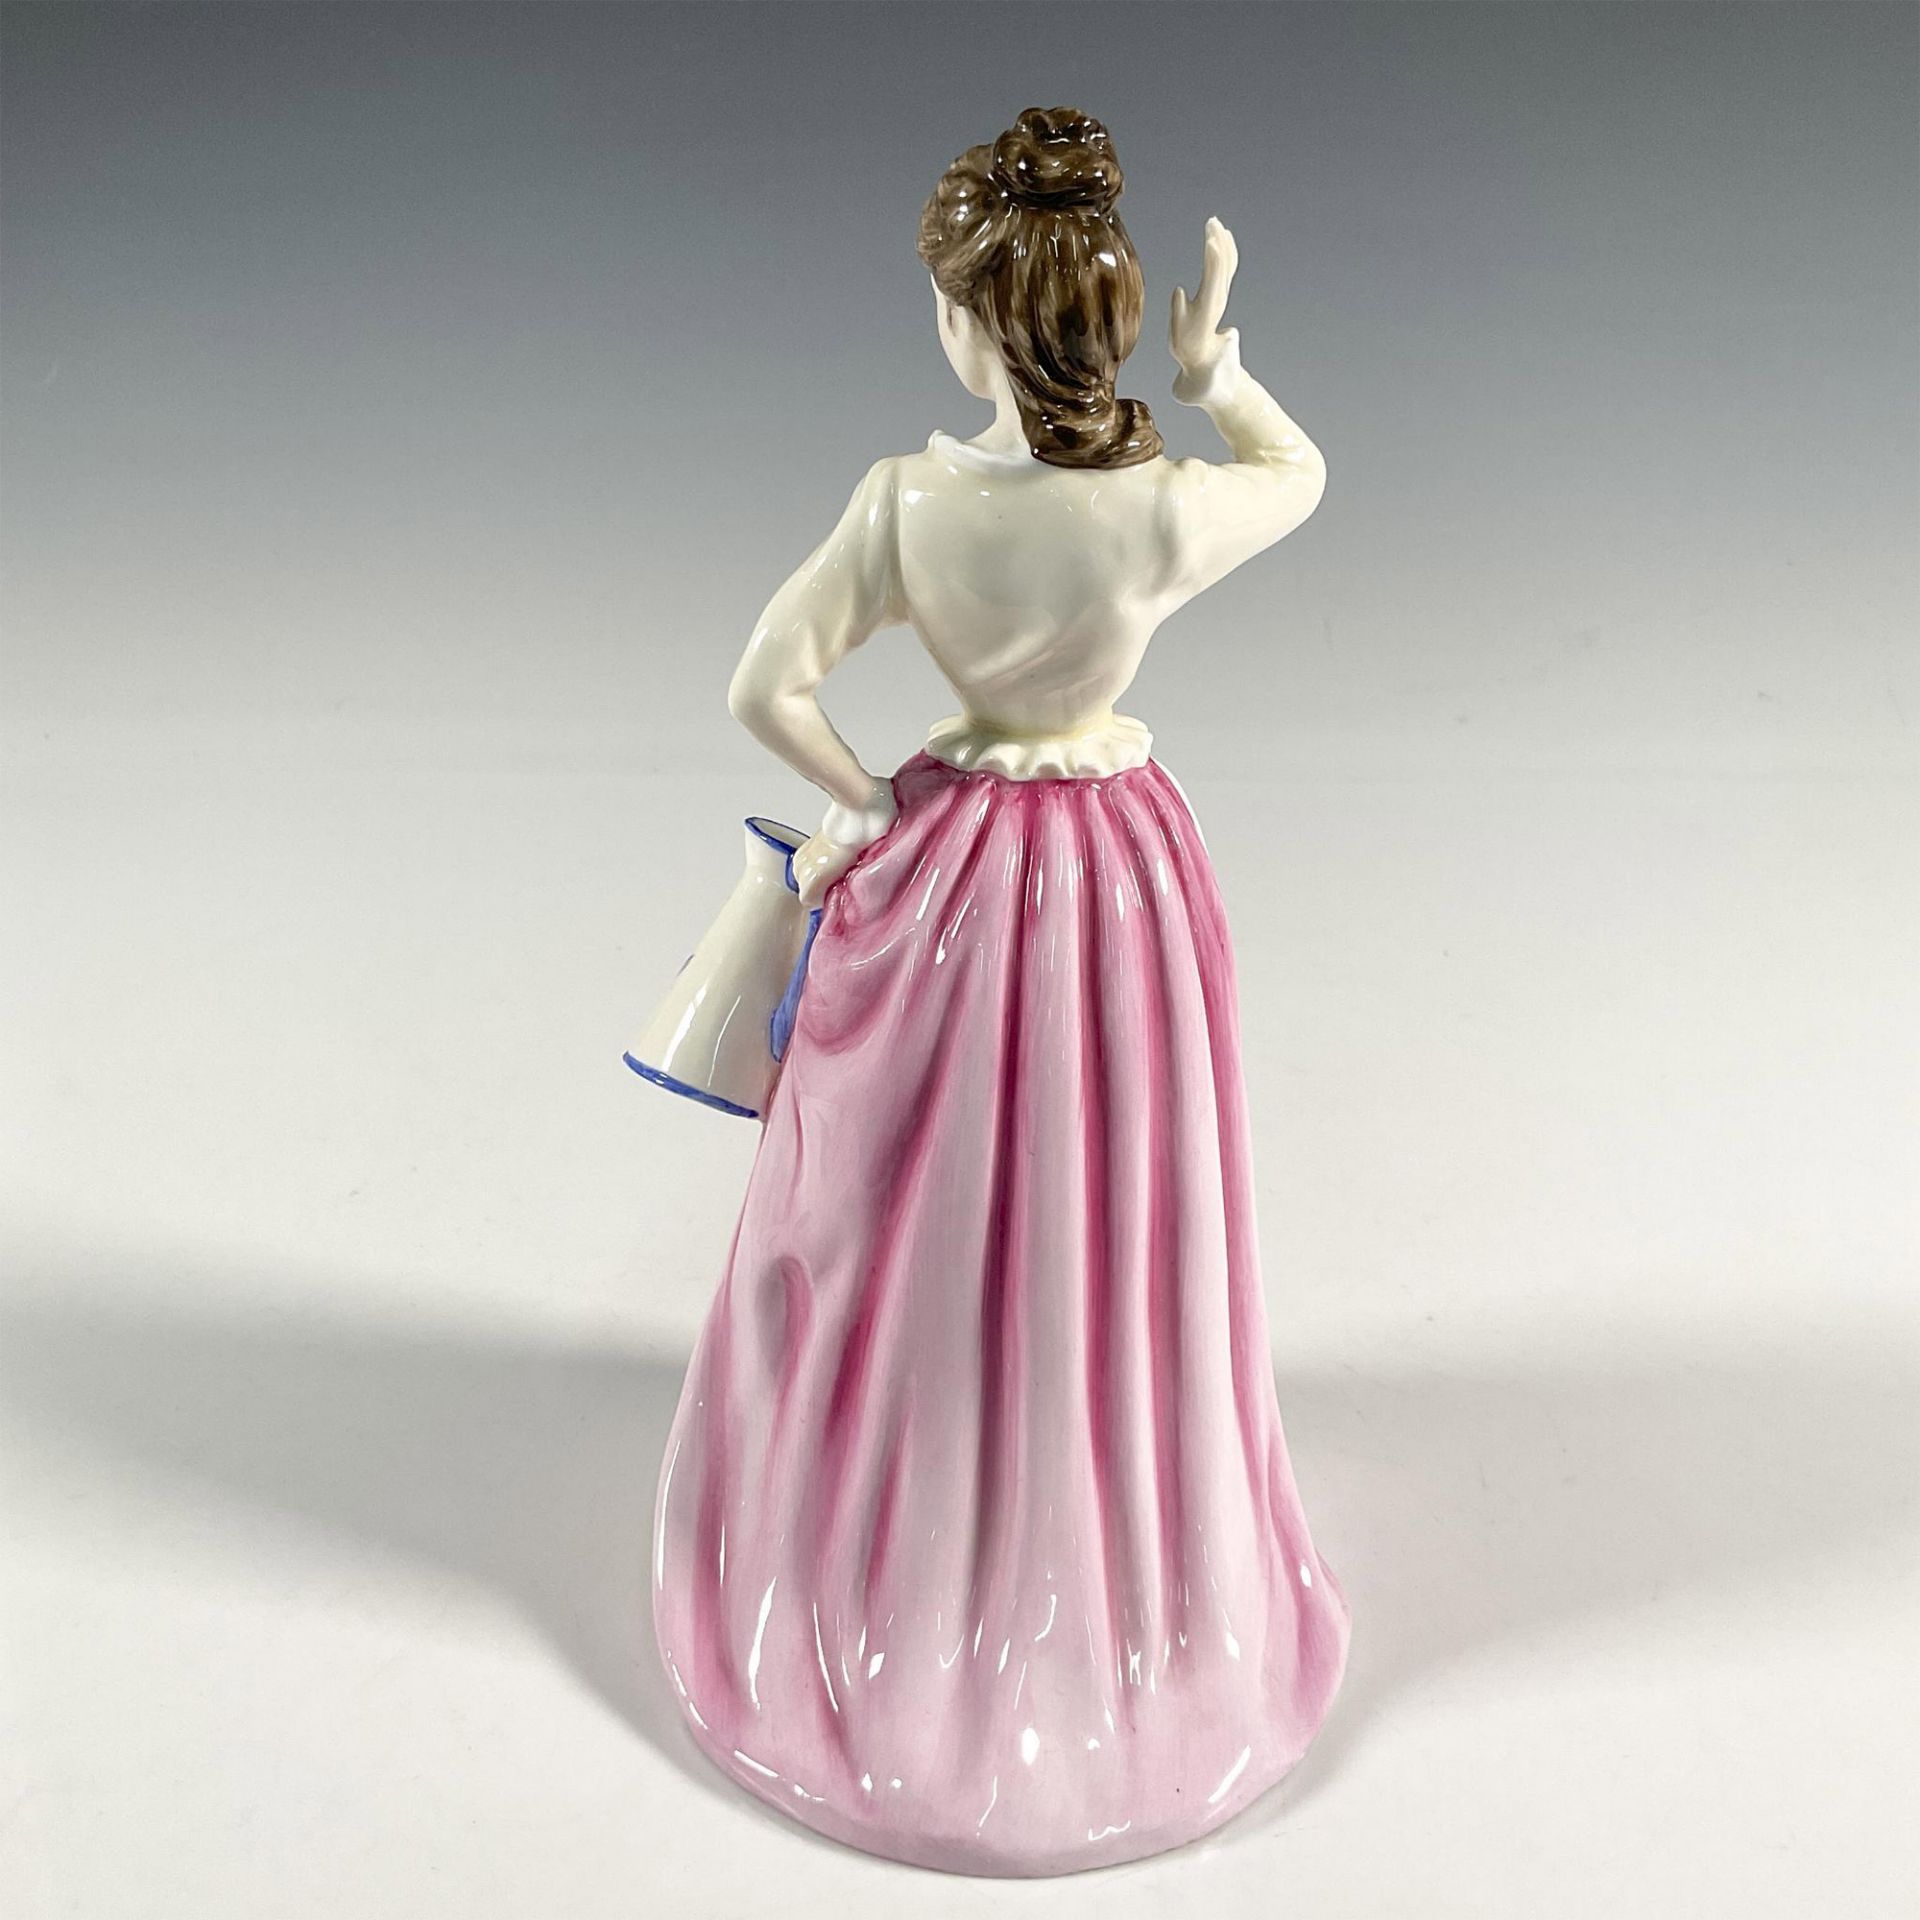 Dairy Maid HN4249 - Royal Doulton Figurine - Image 2 of 3